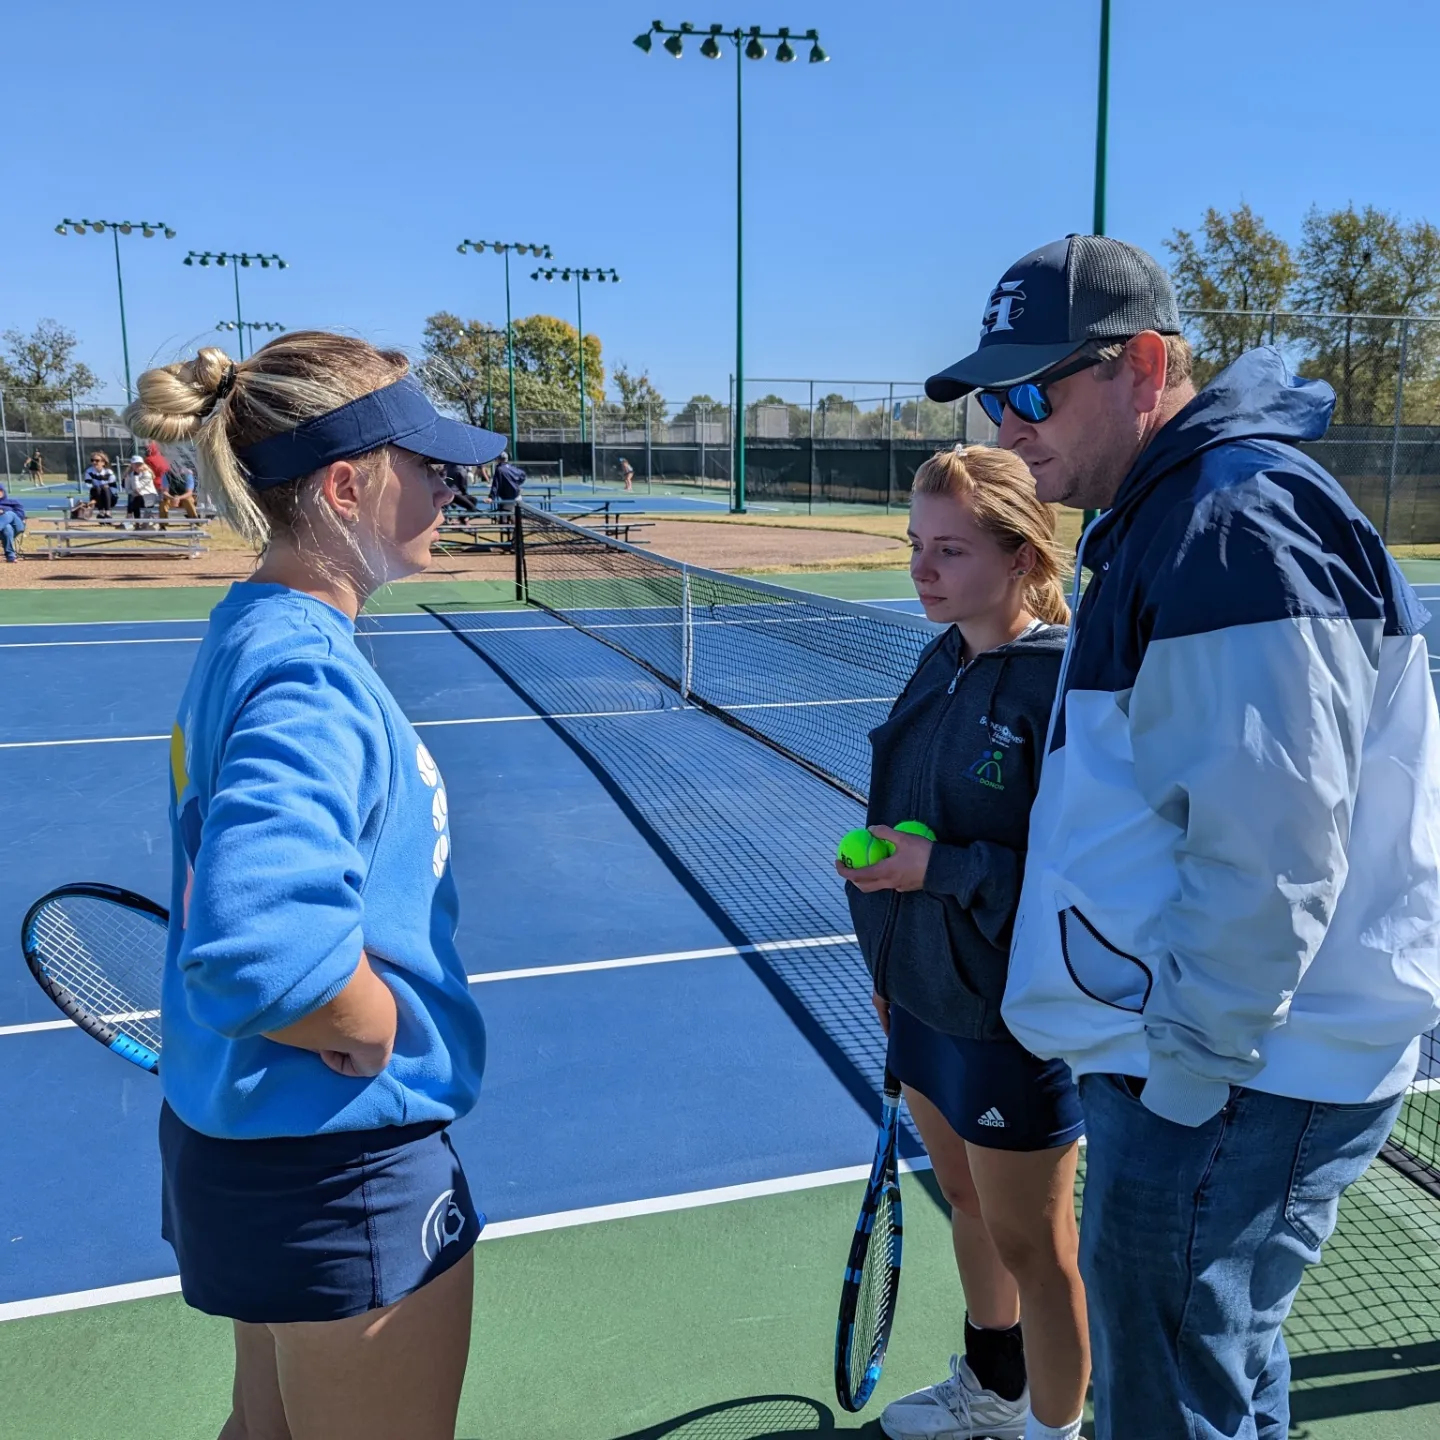 Reed+gives+a+pep+talk+to+seniors+Katie+Groat+and+Kate+Voges+at+State+in+Springfield.+Reed+and+Rohrbach+took+Groat+and+Voges+to+State+on+October+13.+Photo+by+FHC+Tennis+%40FHCTennisFam+